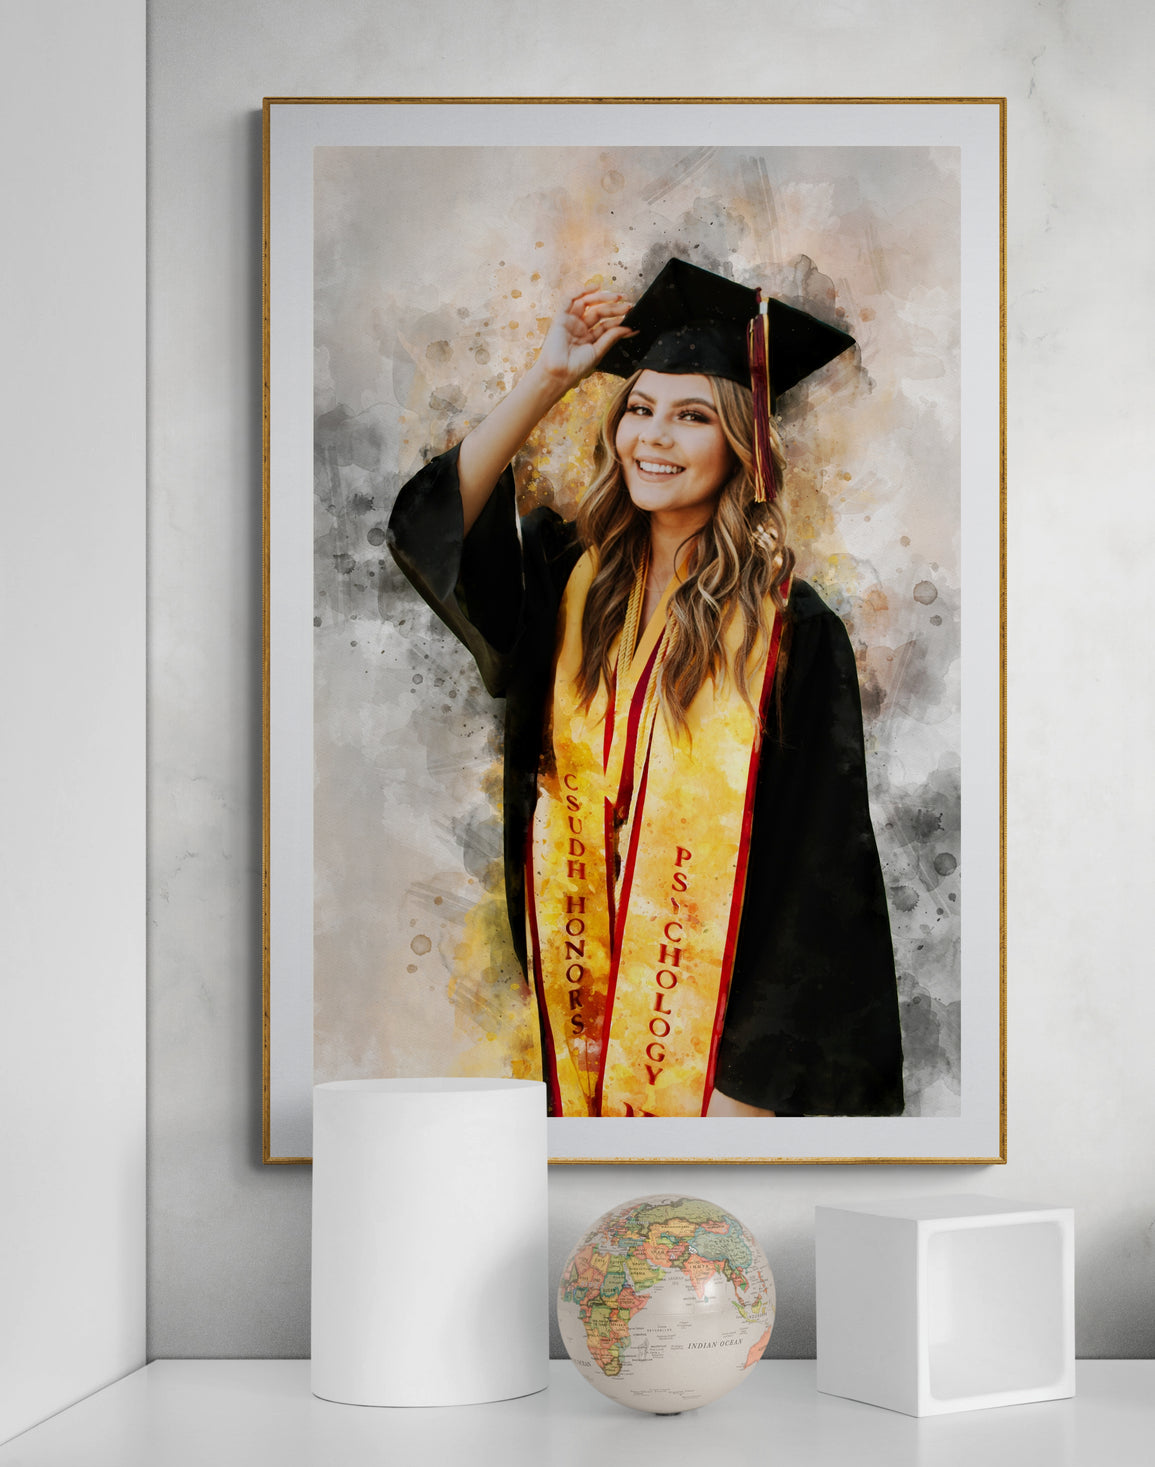 Personalized Daughter Portrait - Best Friend Birthday Gift for Her or Graduation Gifts for Daughter